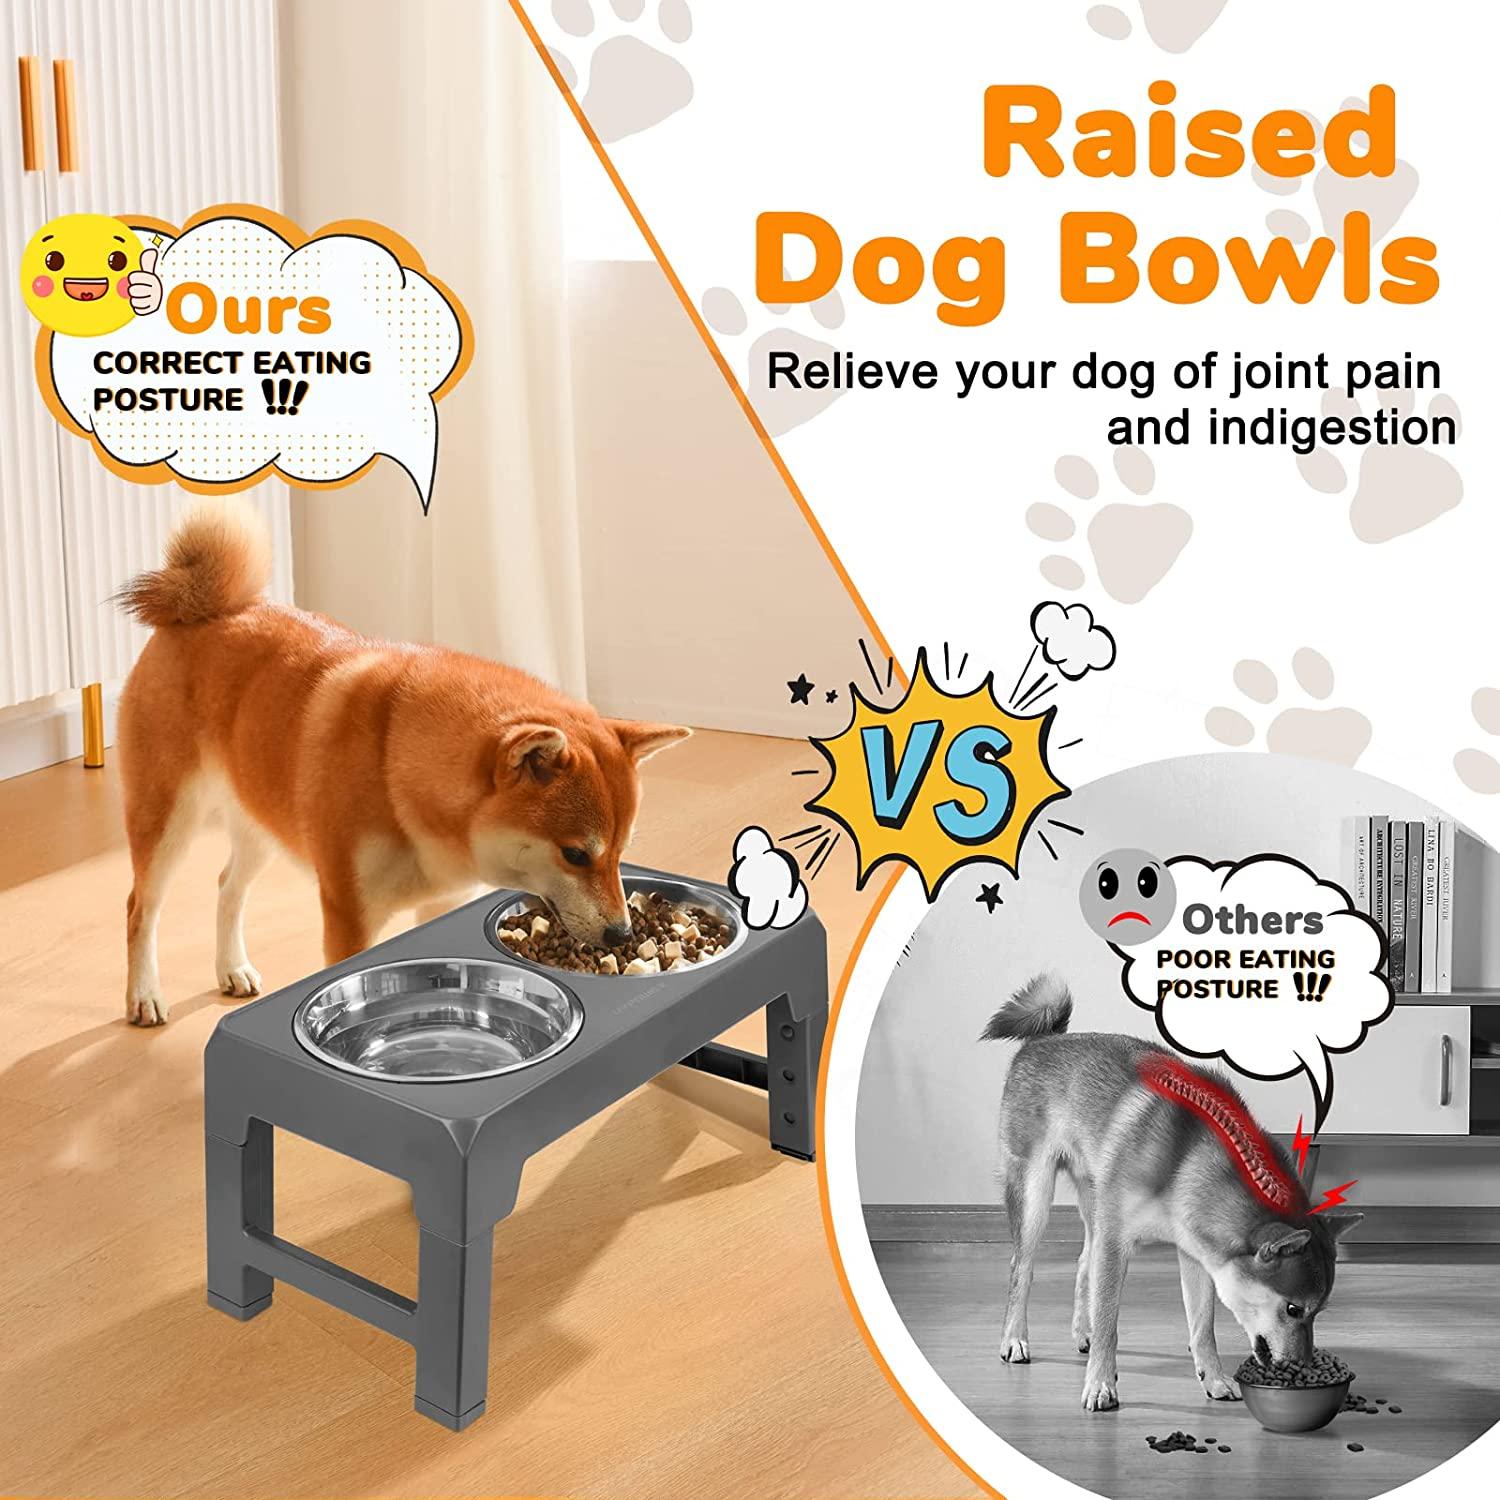 Adjustable Elevated Dog Bowl Stand for Dogs - 4 Heights, Wide 5-10 -Oppro  Single Raised Dogs Food Water Bowls Holder, Upgrade Metal Elevated Dog